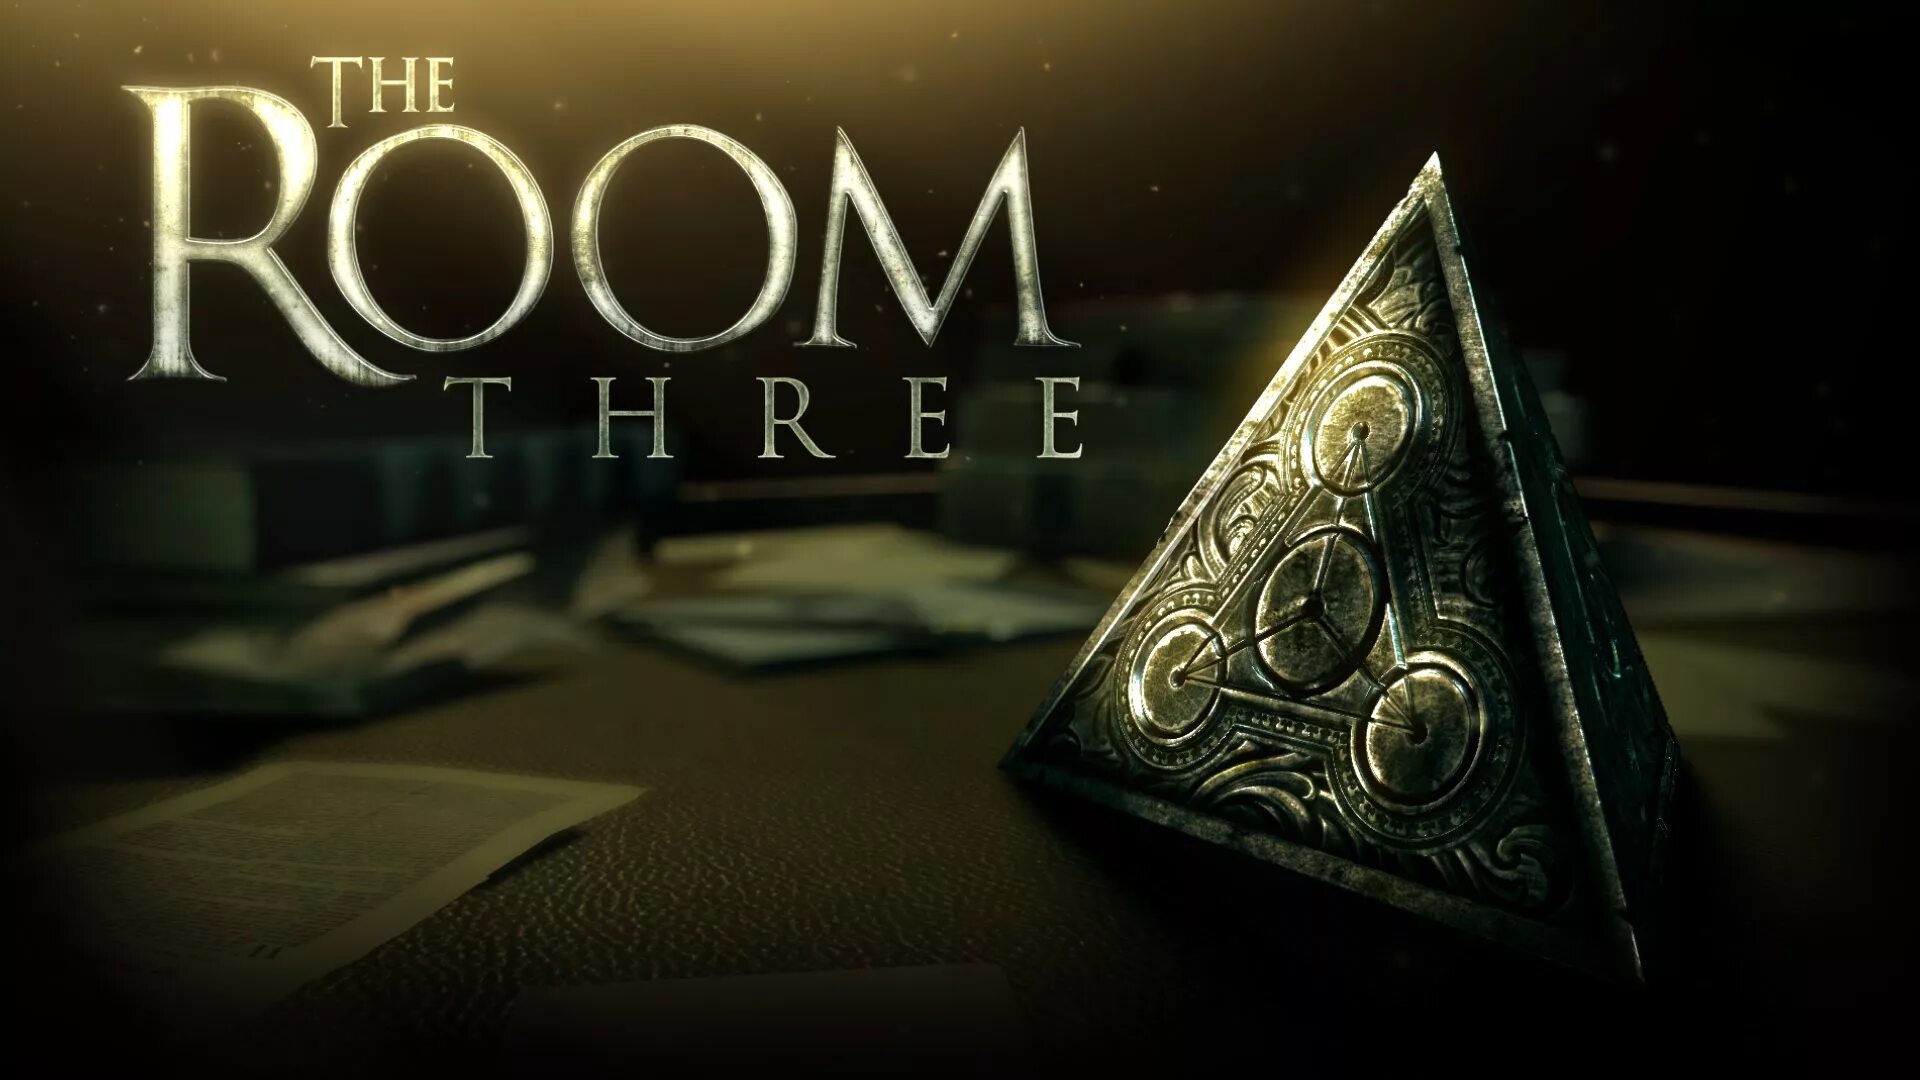 The room poster. The Room (игра). The Room 3. The Room three игра. The Room 3 ПК.